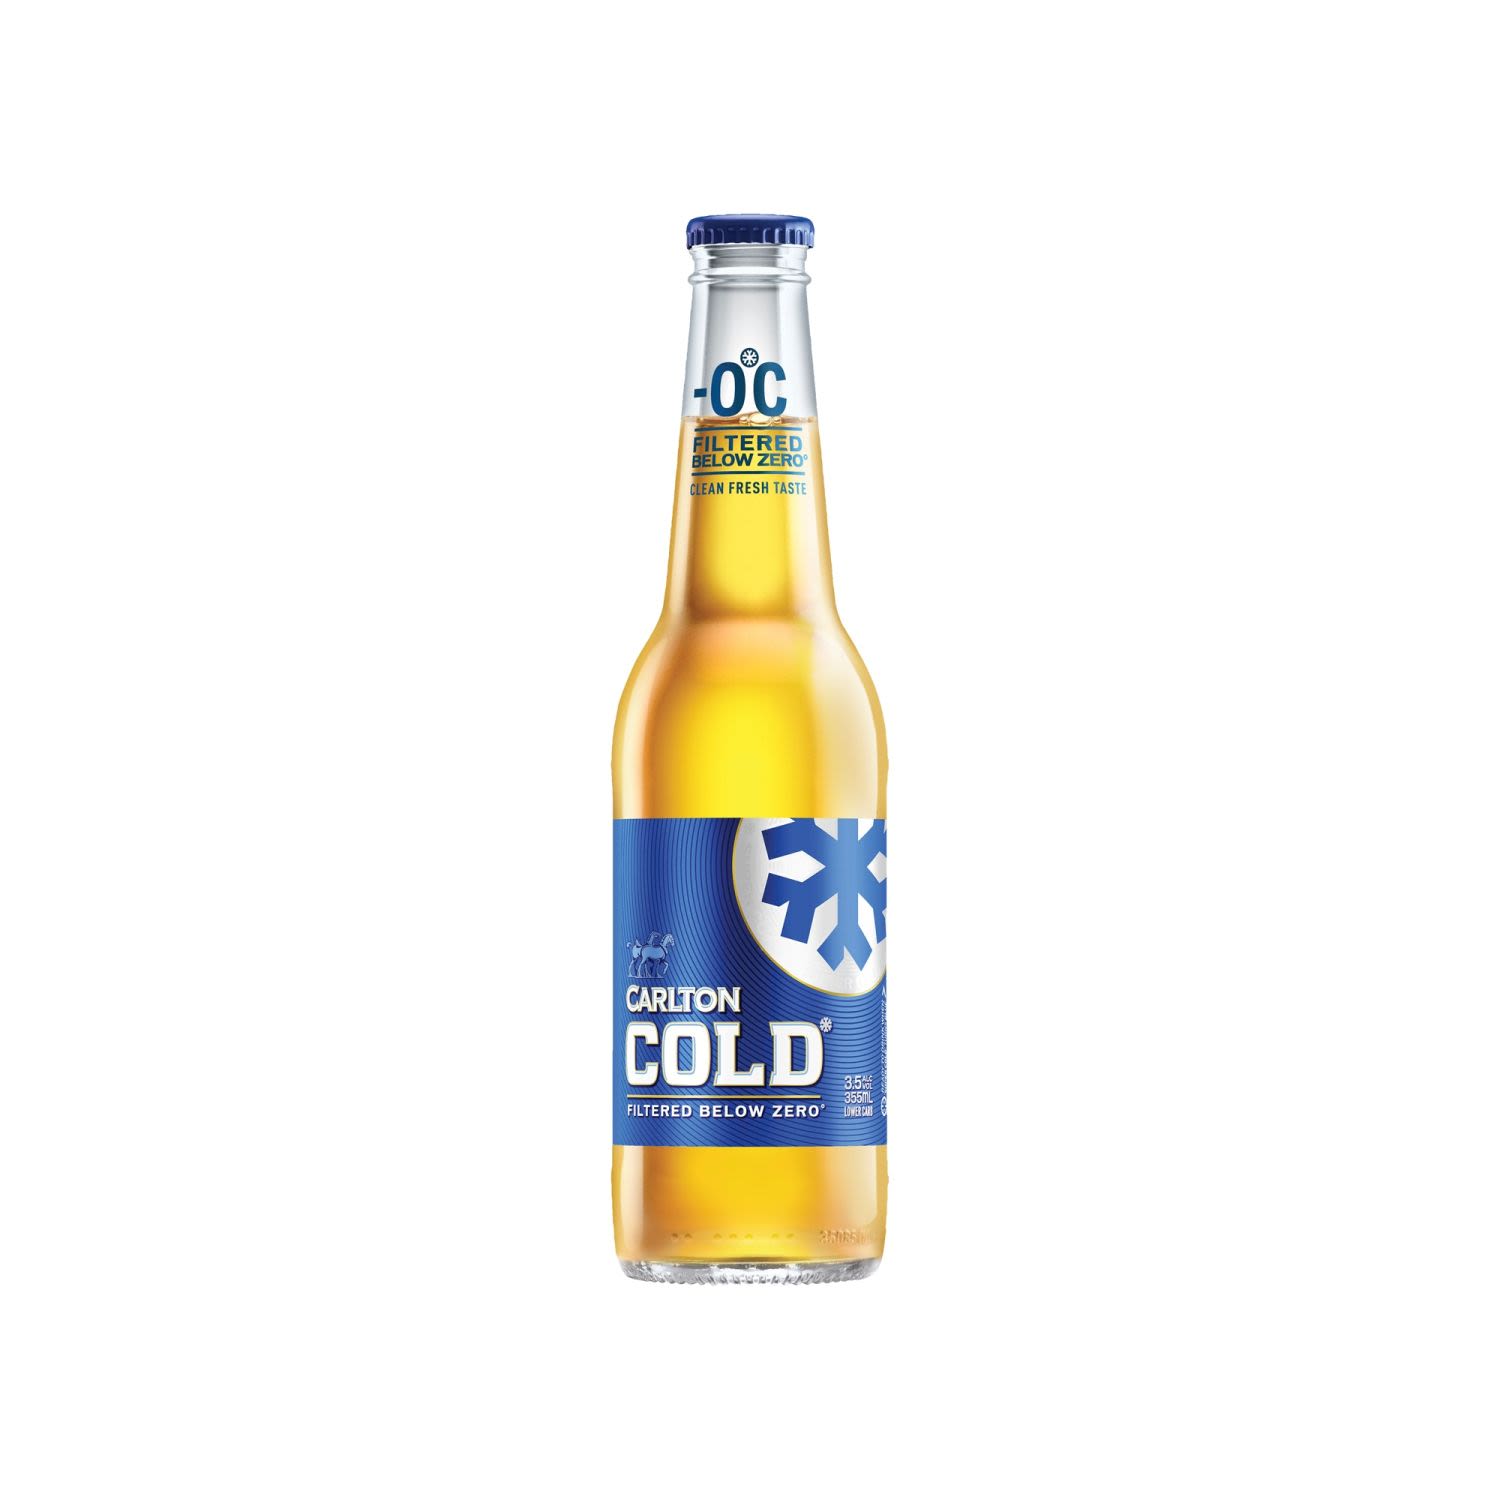 Carlton Cold is filtered below zero degrees celsius, creating a full flavoured fresh taste. The mid strength beer has subtle bitterness with a crisp dry finish, providing an easy drinking experience.<br /> <br />Alcohol Volume: 3.50%<br /><br />Pack Format: Bottle<br /><br />Standard Drinks: 1</br /><br />Pack Type: Bottle<br /><br />Country of Origin: Australia<br />